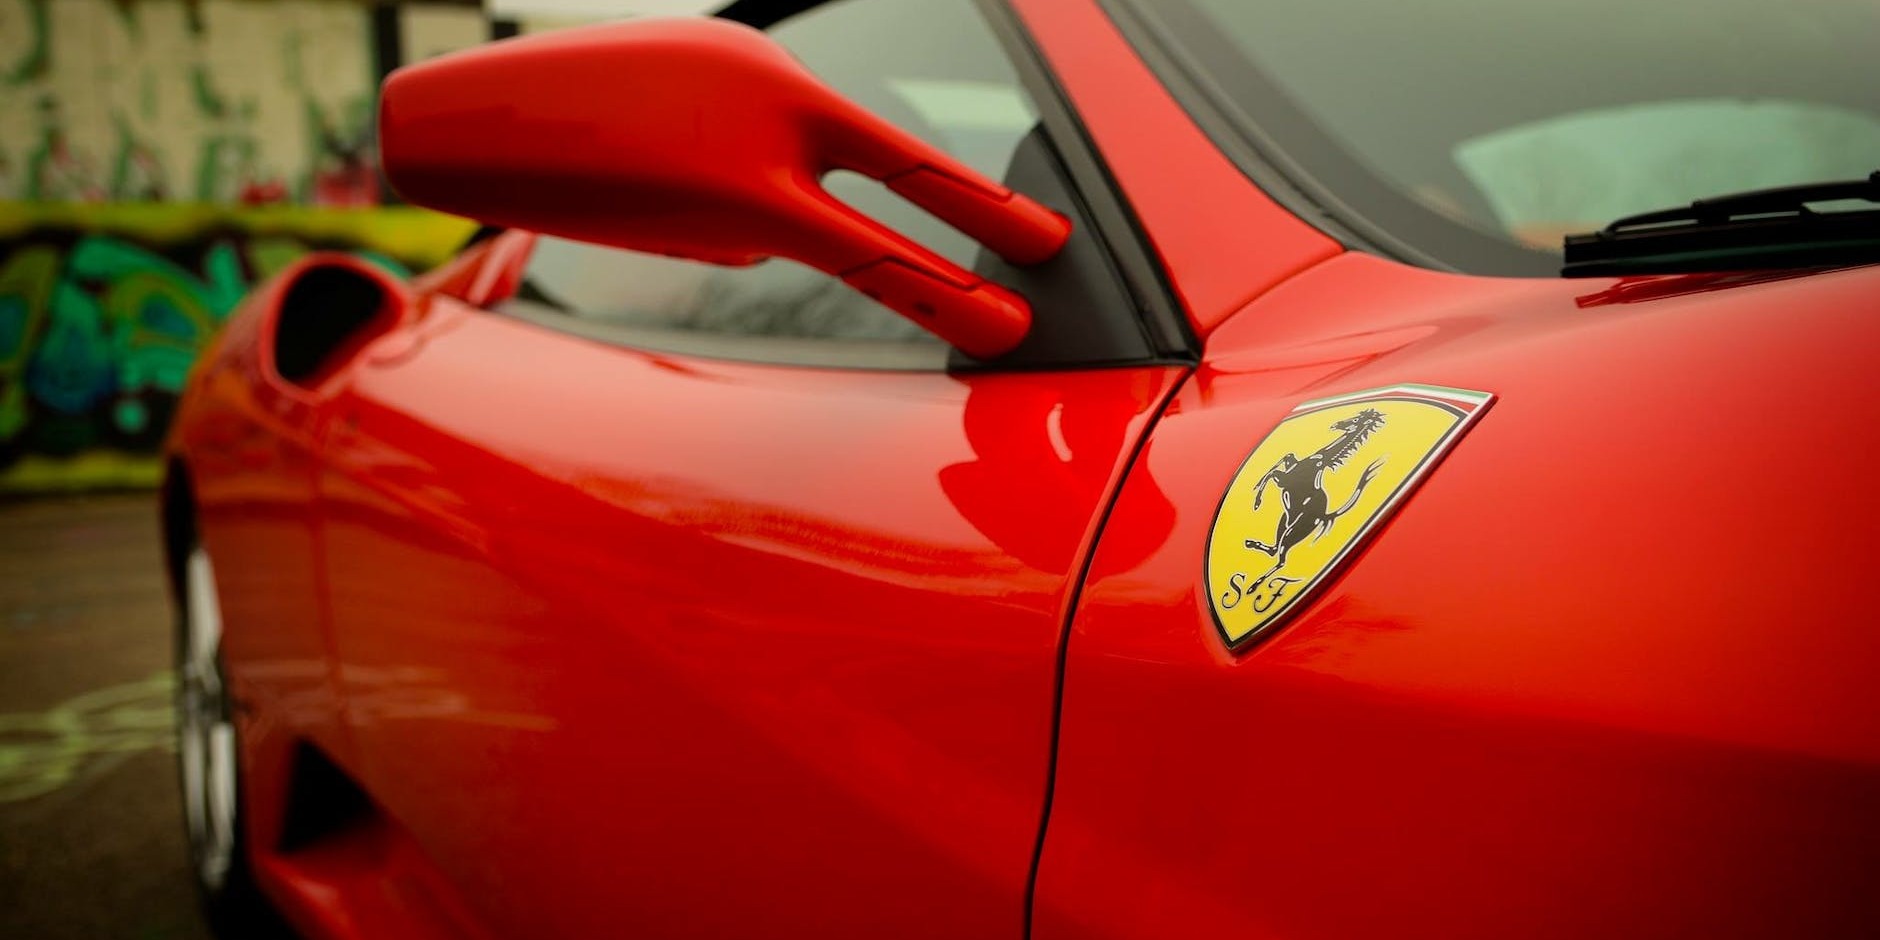 What Makes the Ferrari Experience in London So Unforgettable?